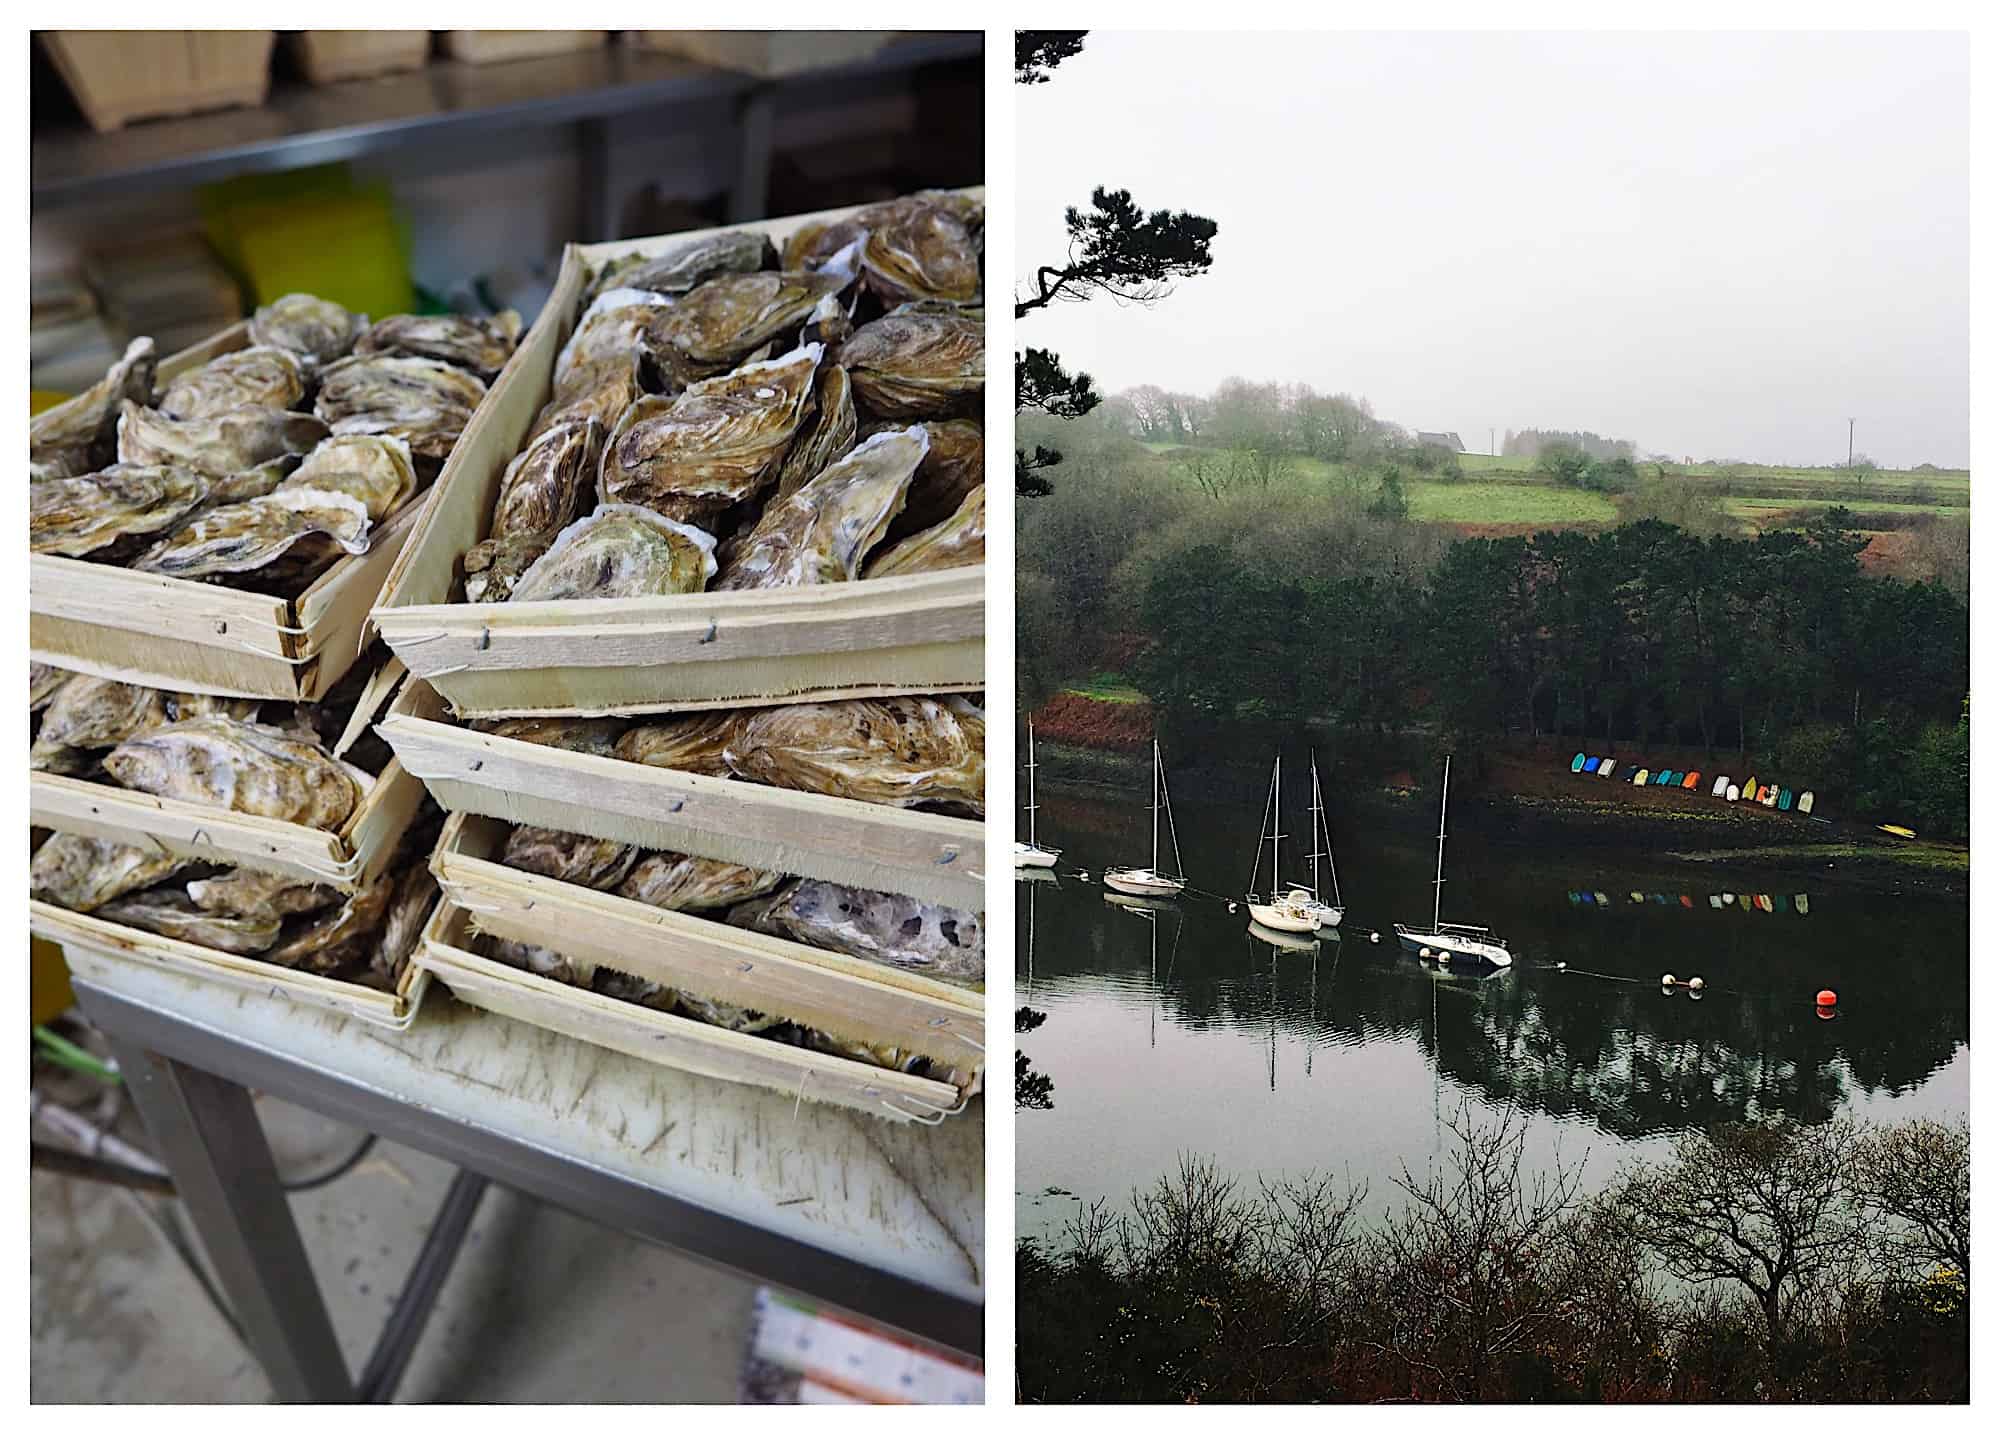 A foodie guide to Brittany, France, including where to have the best oysters (left) and where to take walks along the water (right).